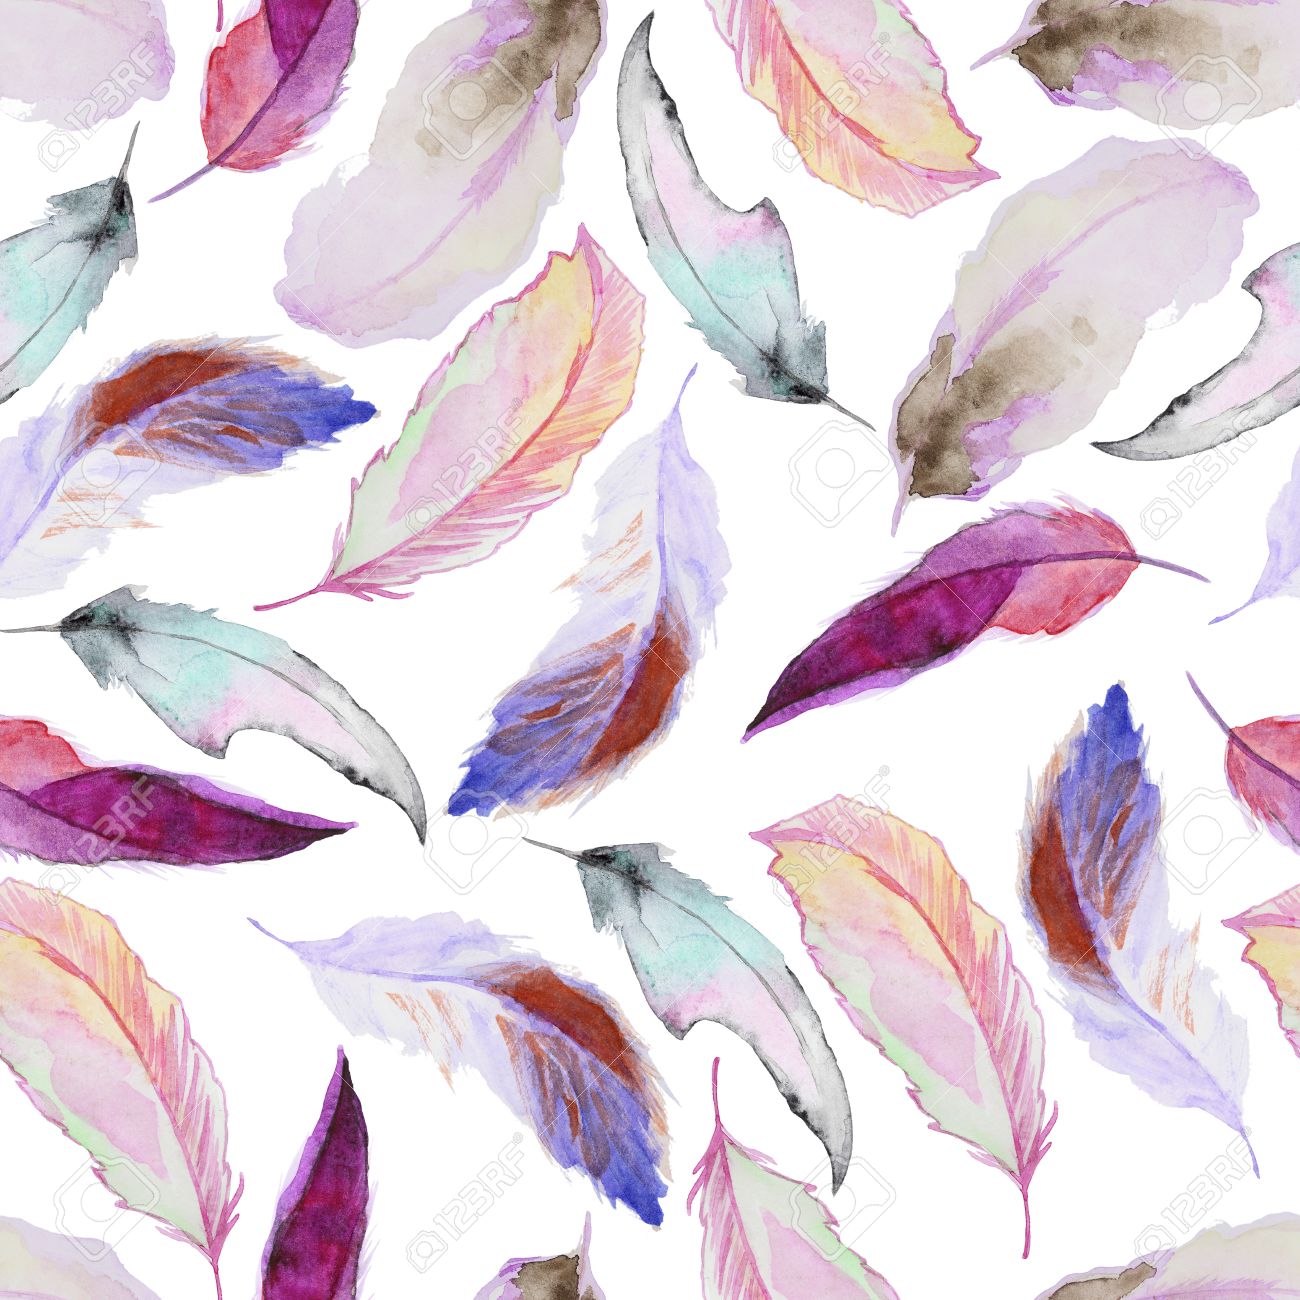 Seamless Watercolor Pattern With Feathers Vintage